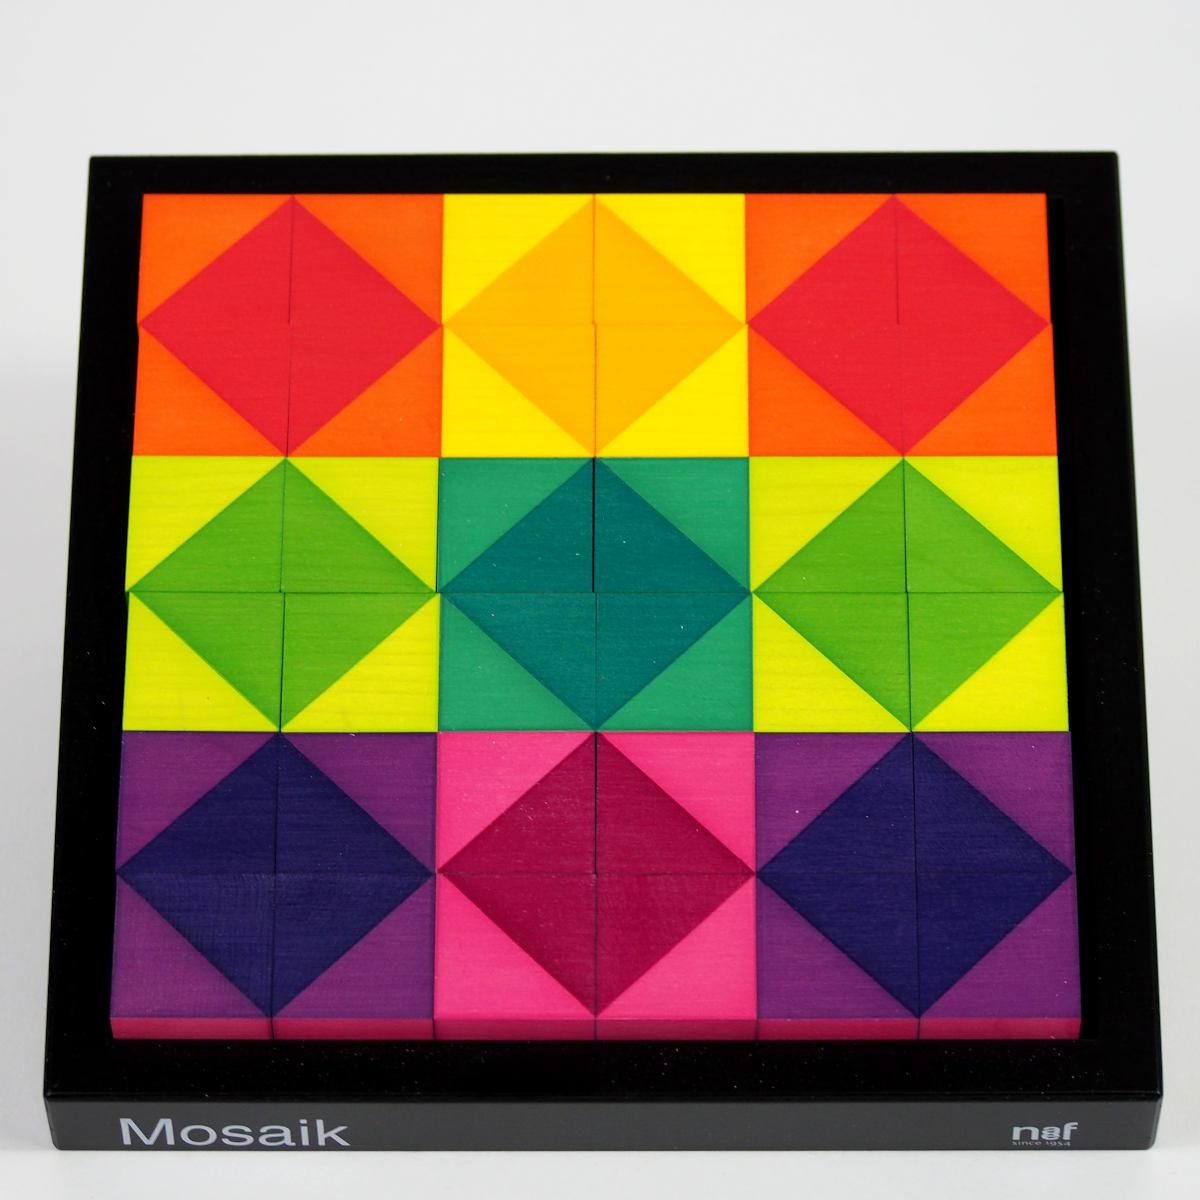 Mosaic 36 – Original Naef Game with Color Blocks, made of Wood